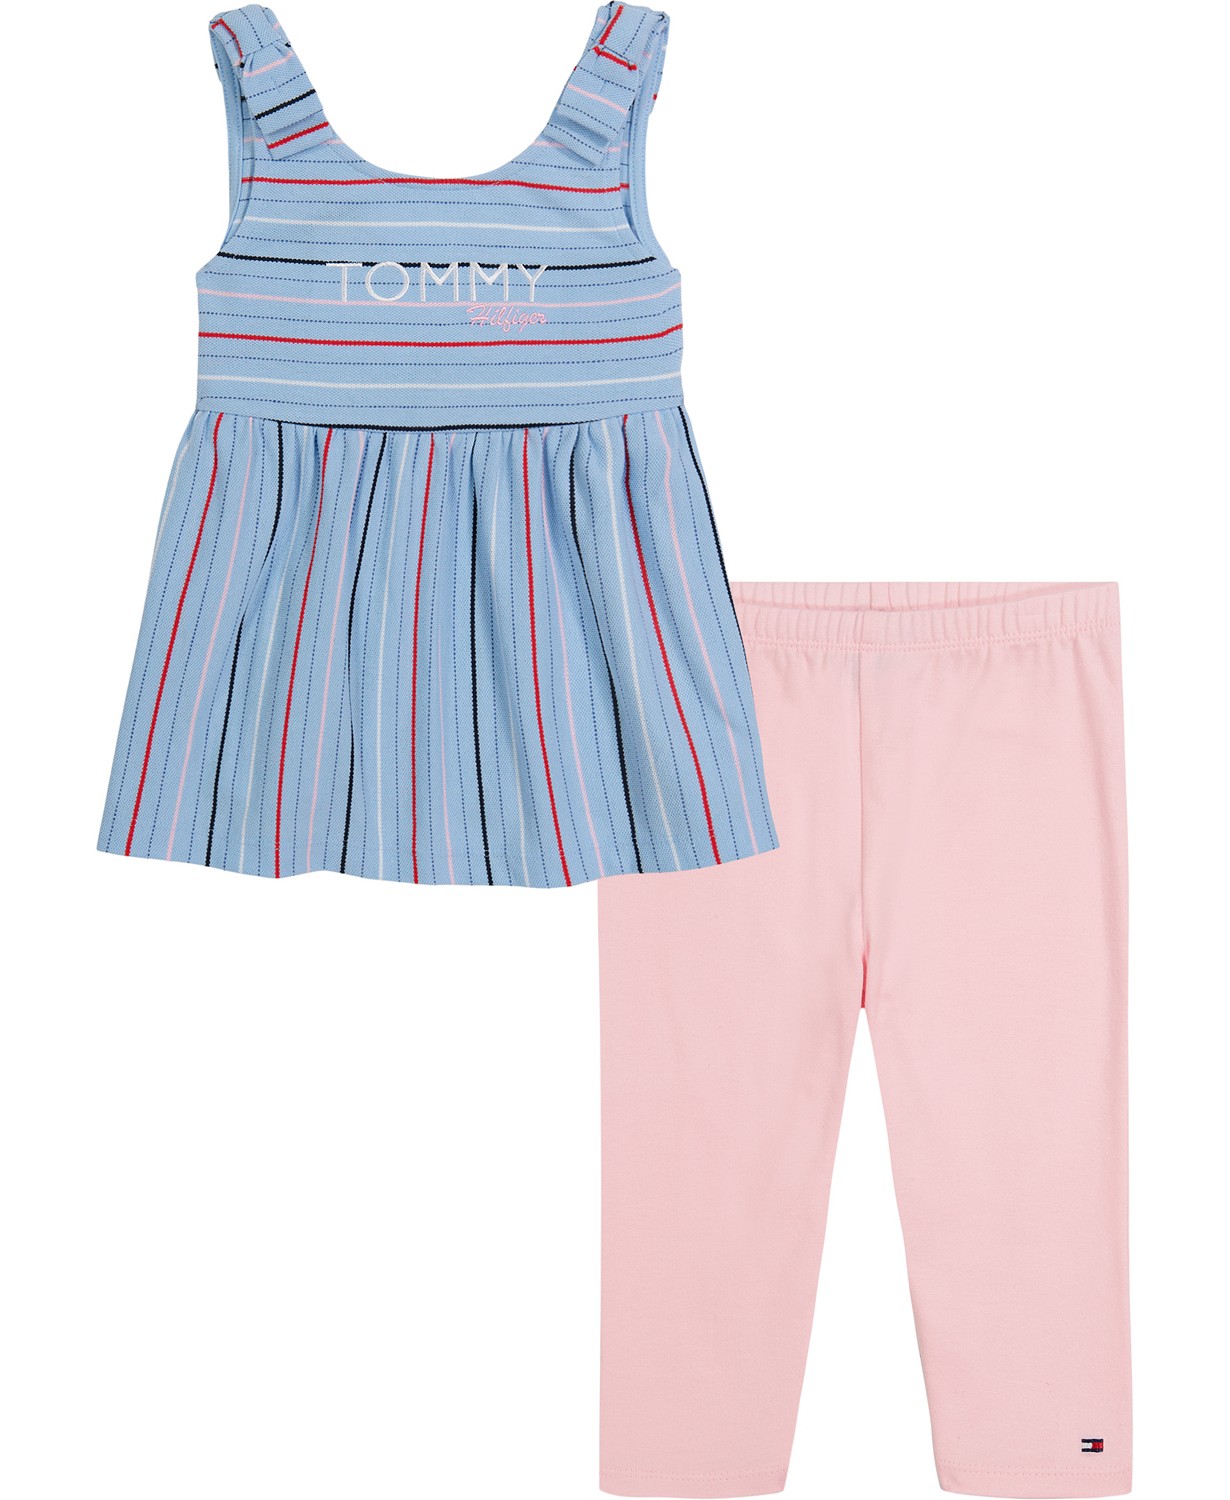 Baby Girls Striped Oxford Babydoll Tunic and Leggings, 2 Piece Set